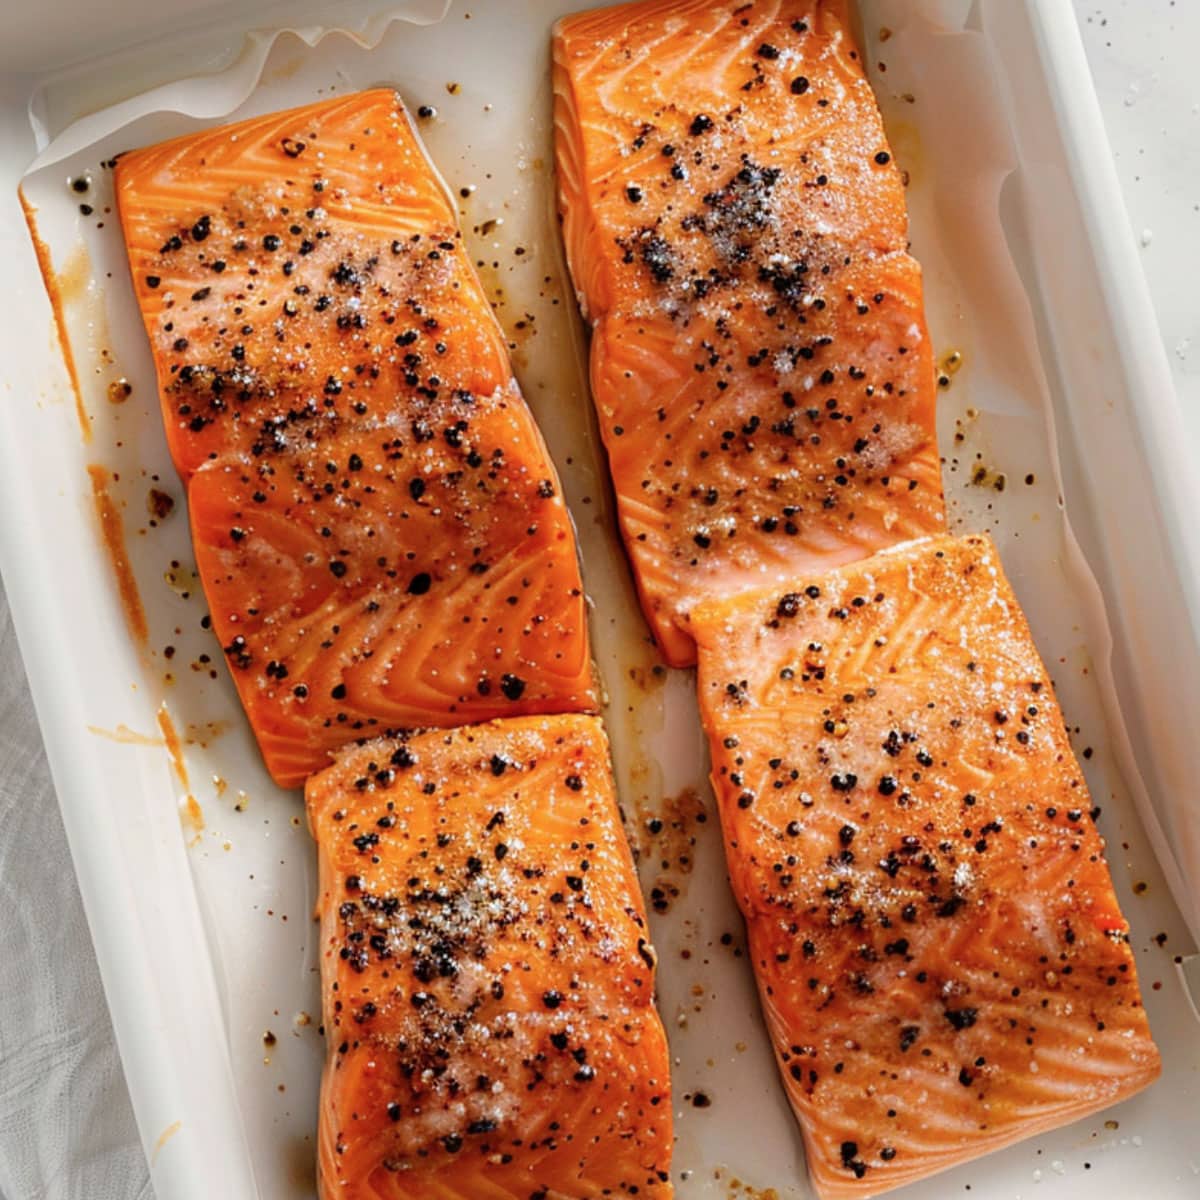 A freshly baked salmon fillet with a golden-brown crust.